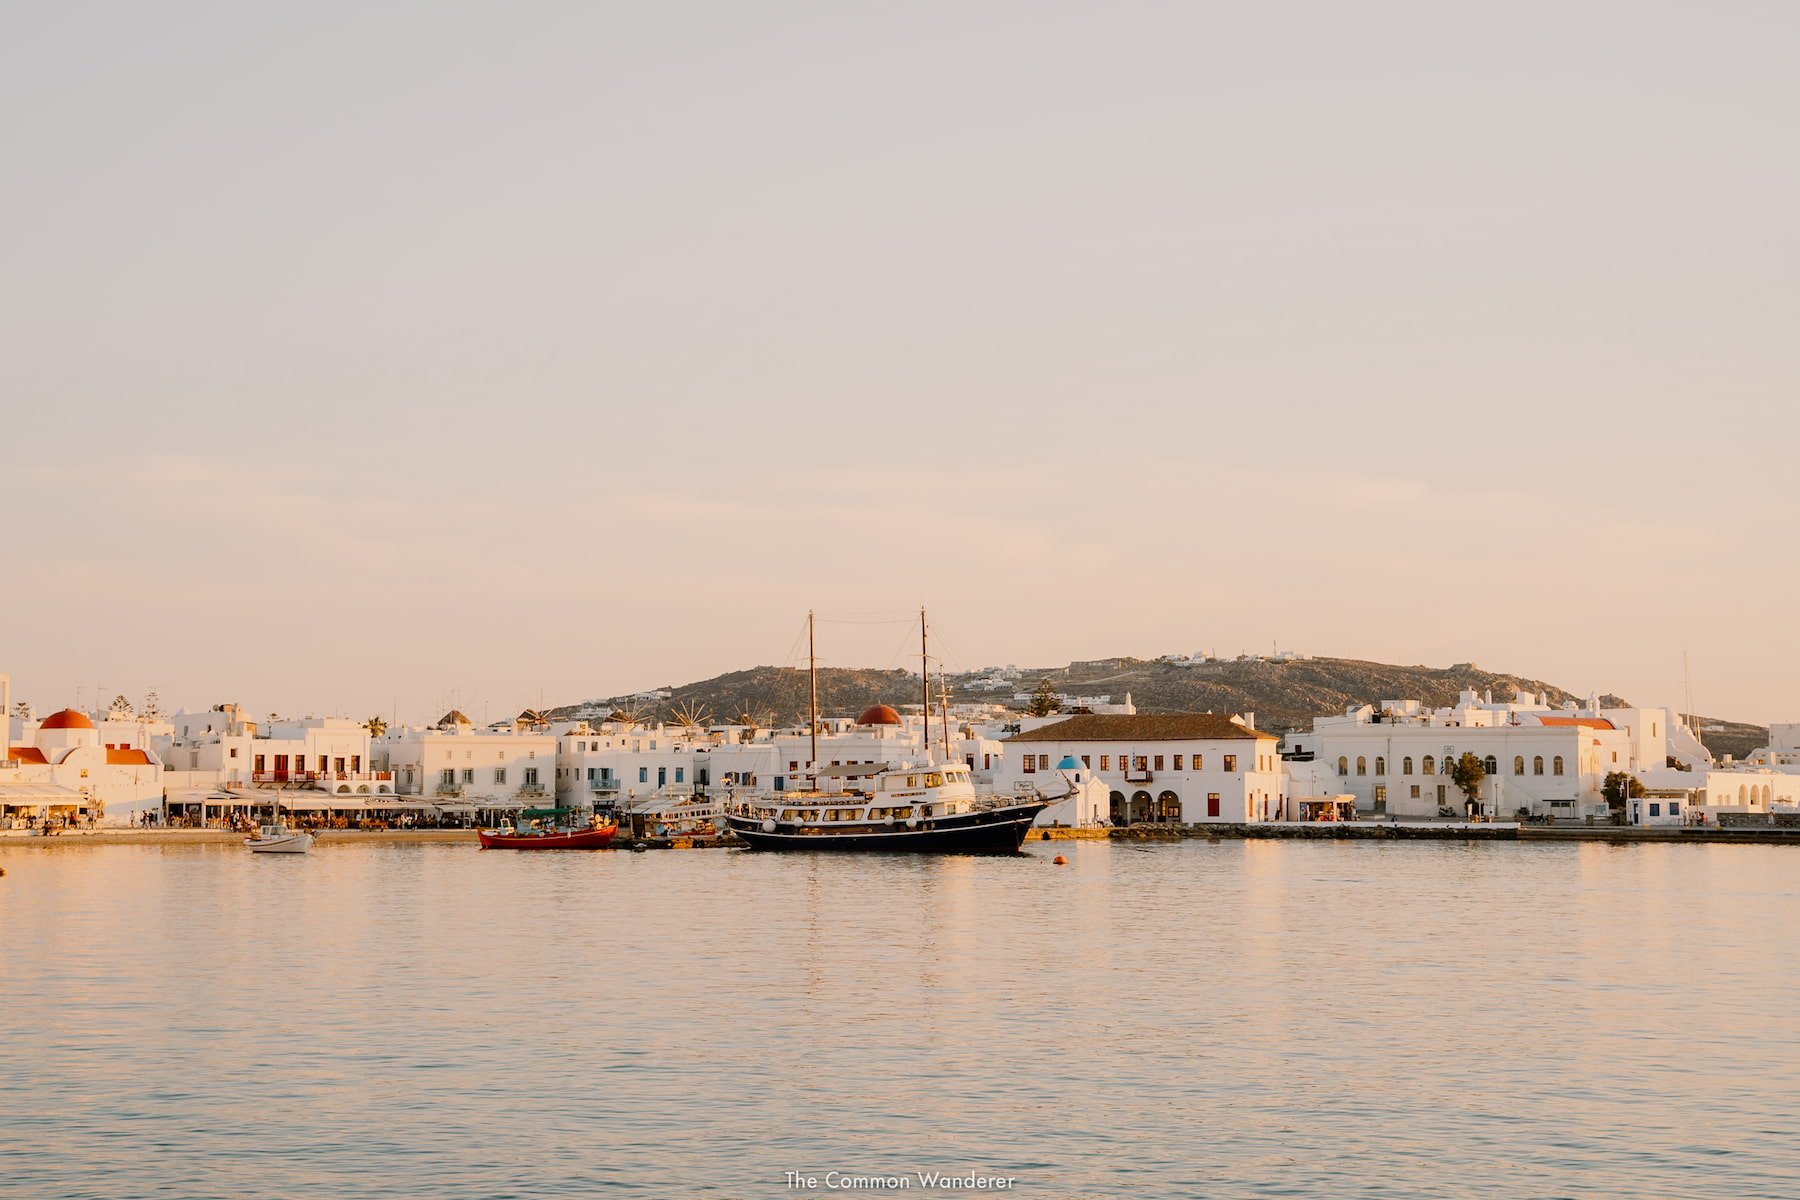 Our projects: Nammos Village, Mykonos - Greece